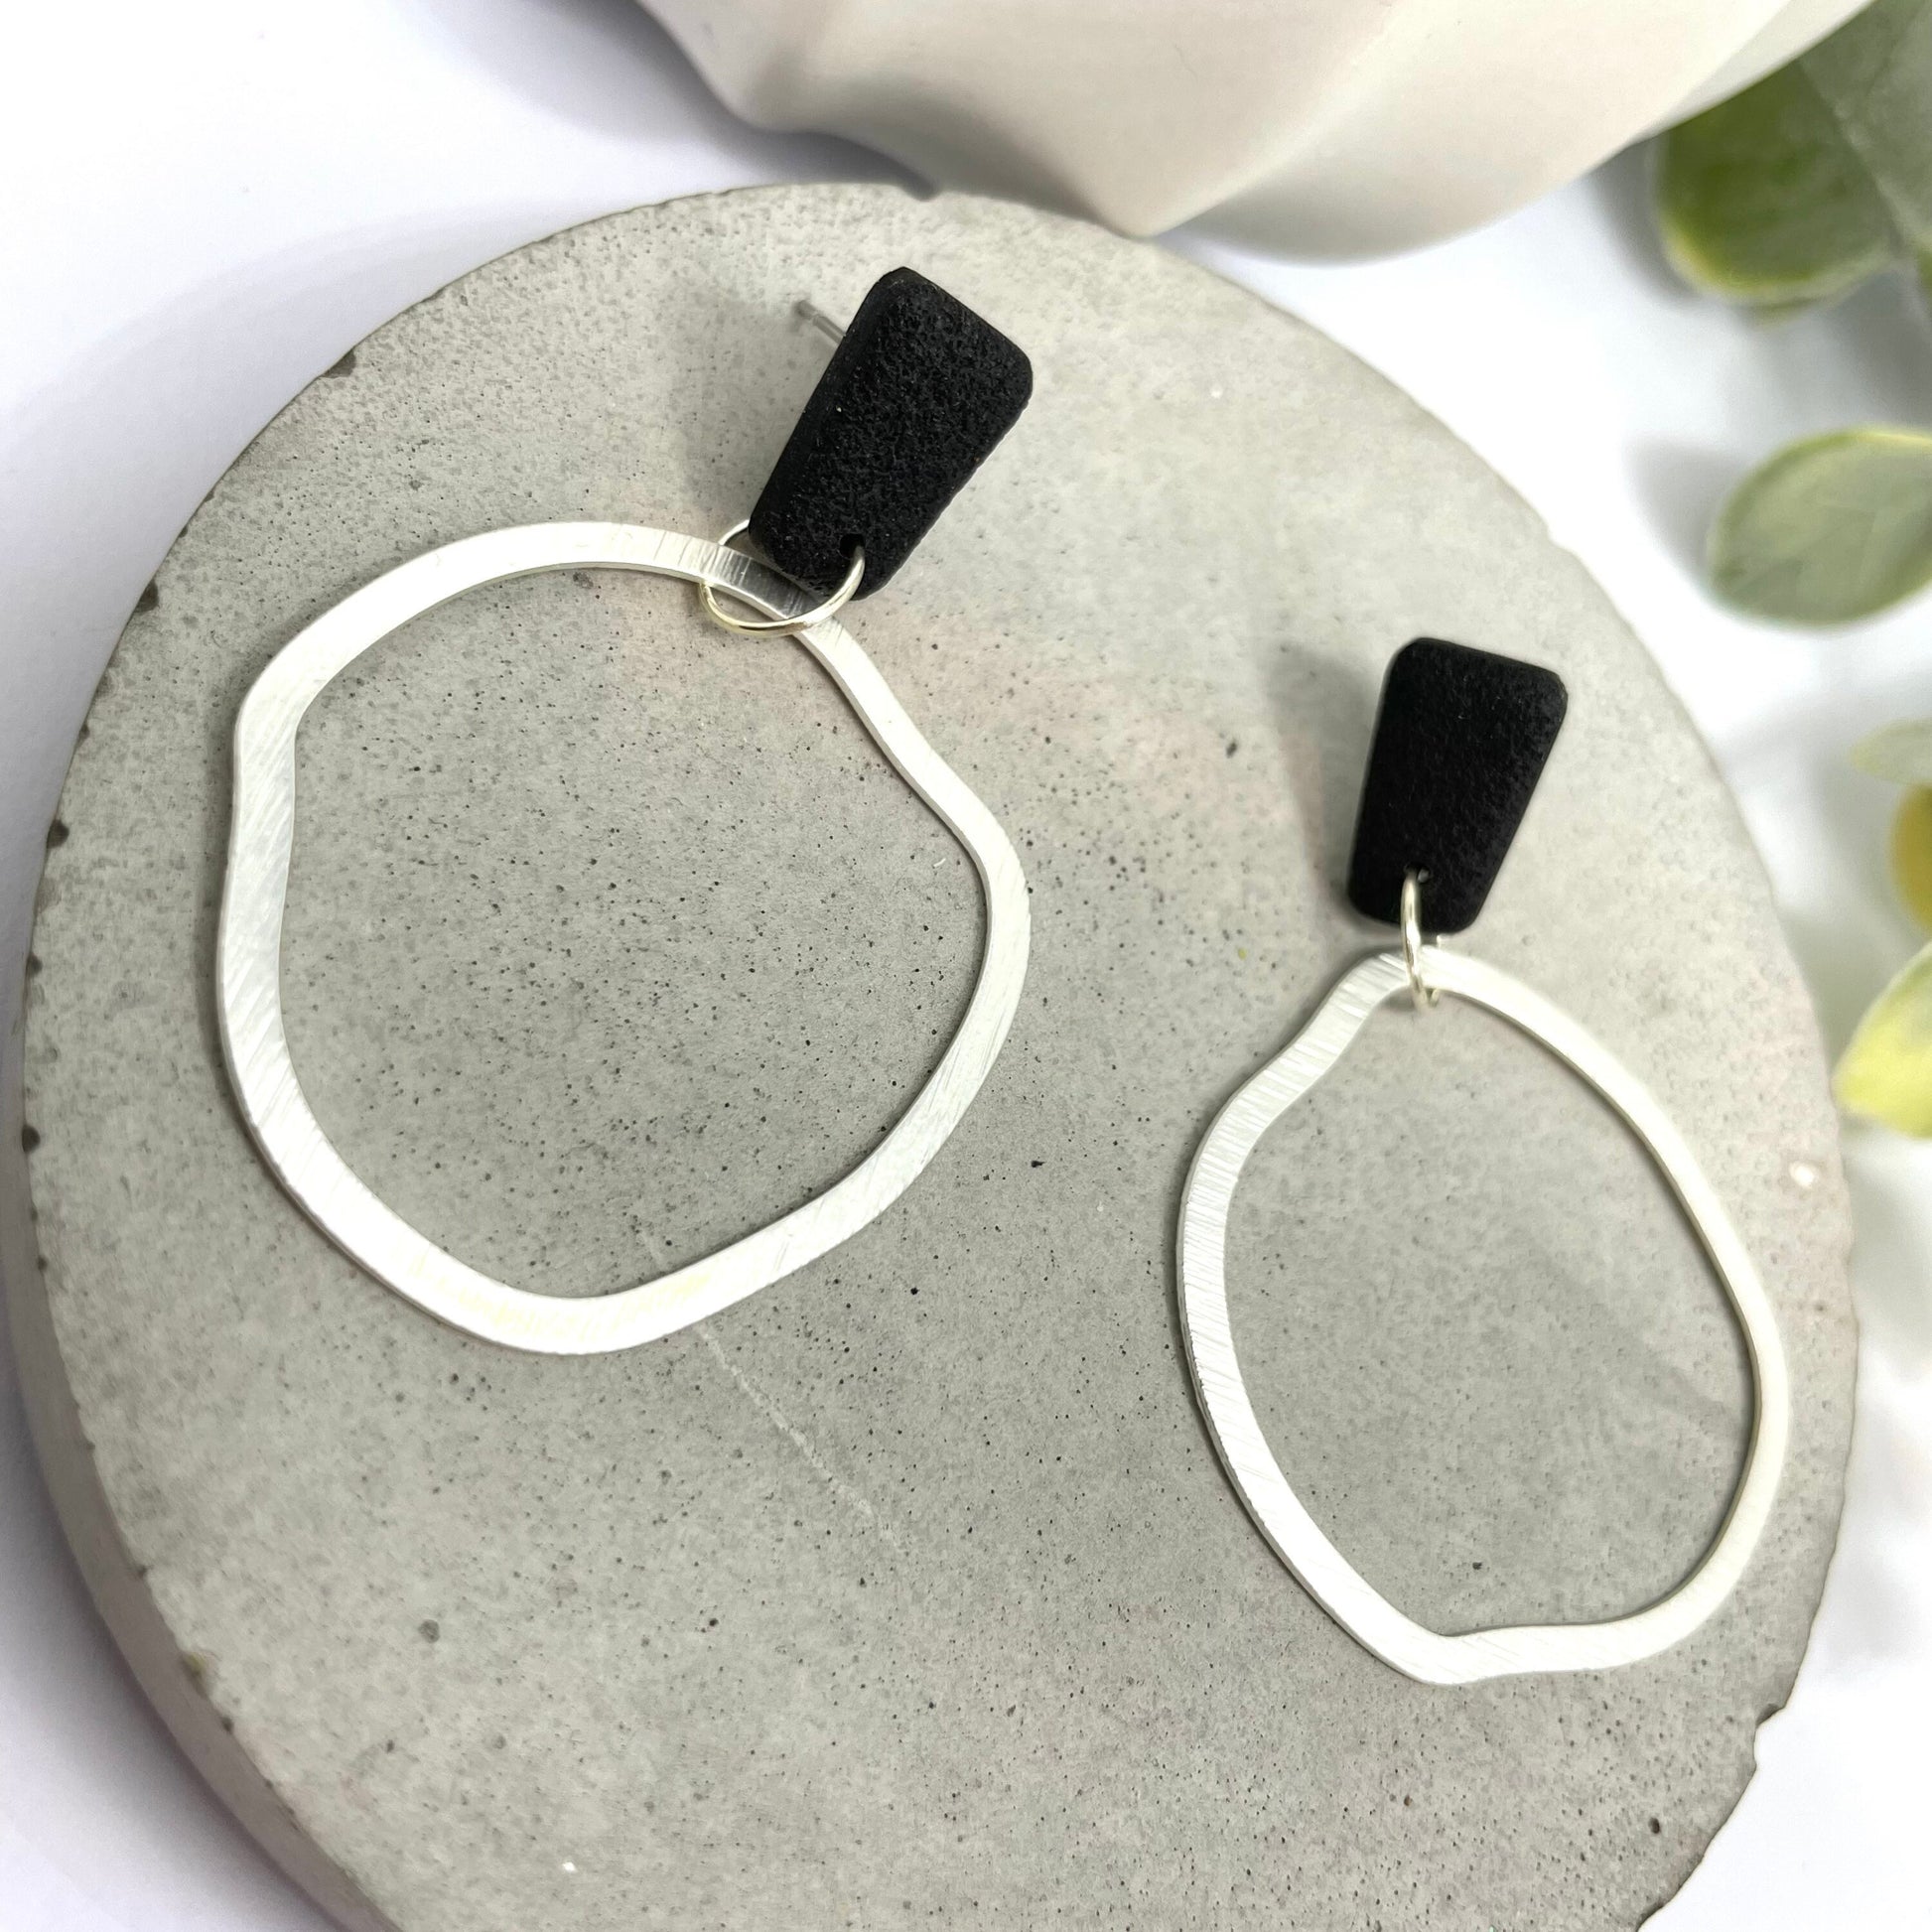 Stainless steel hoop earrings, polymer clay earrings, beautiful birthday gift for her, post box gift, best friend birthday gift,